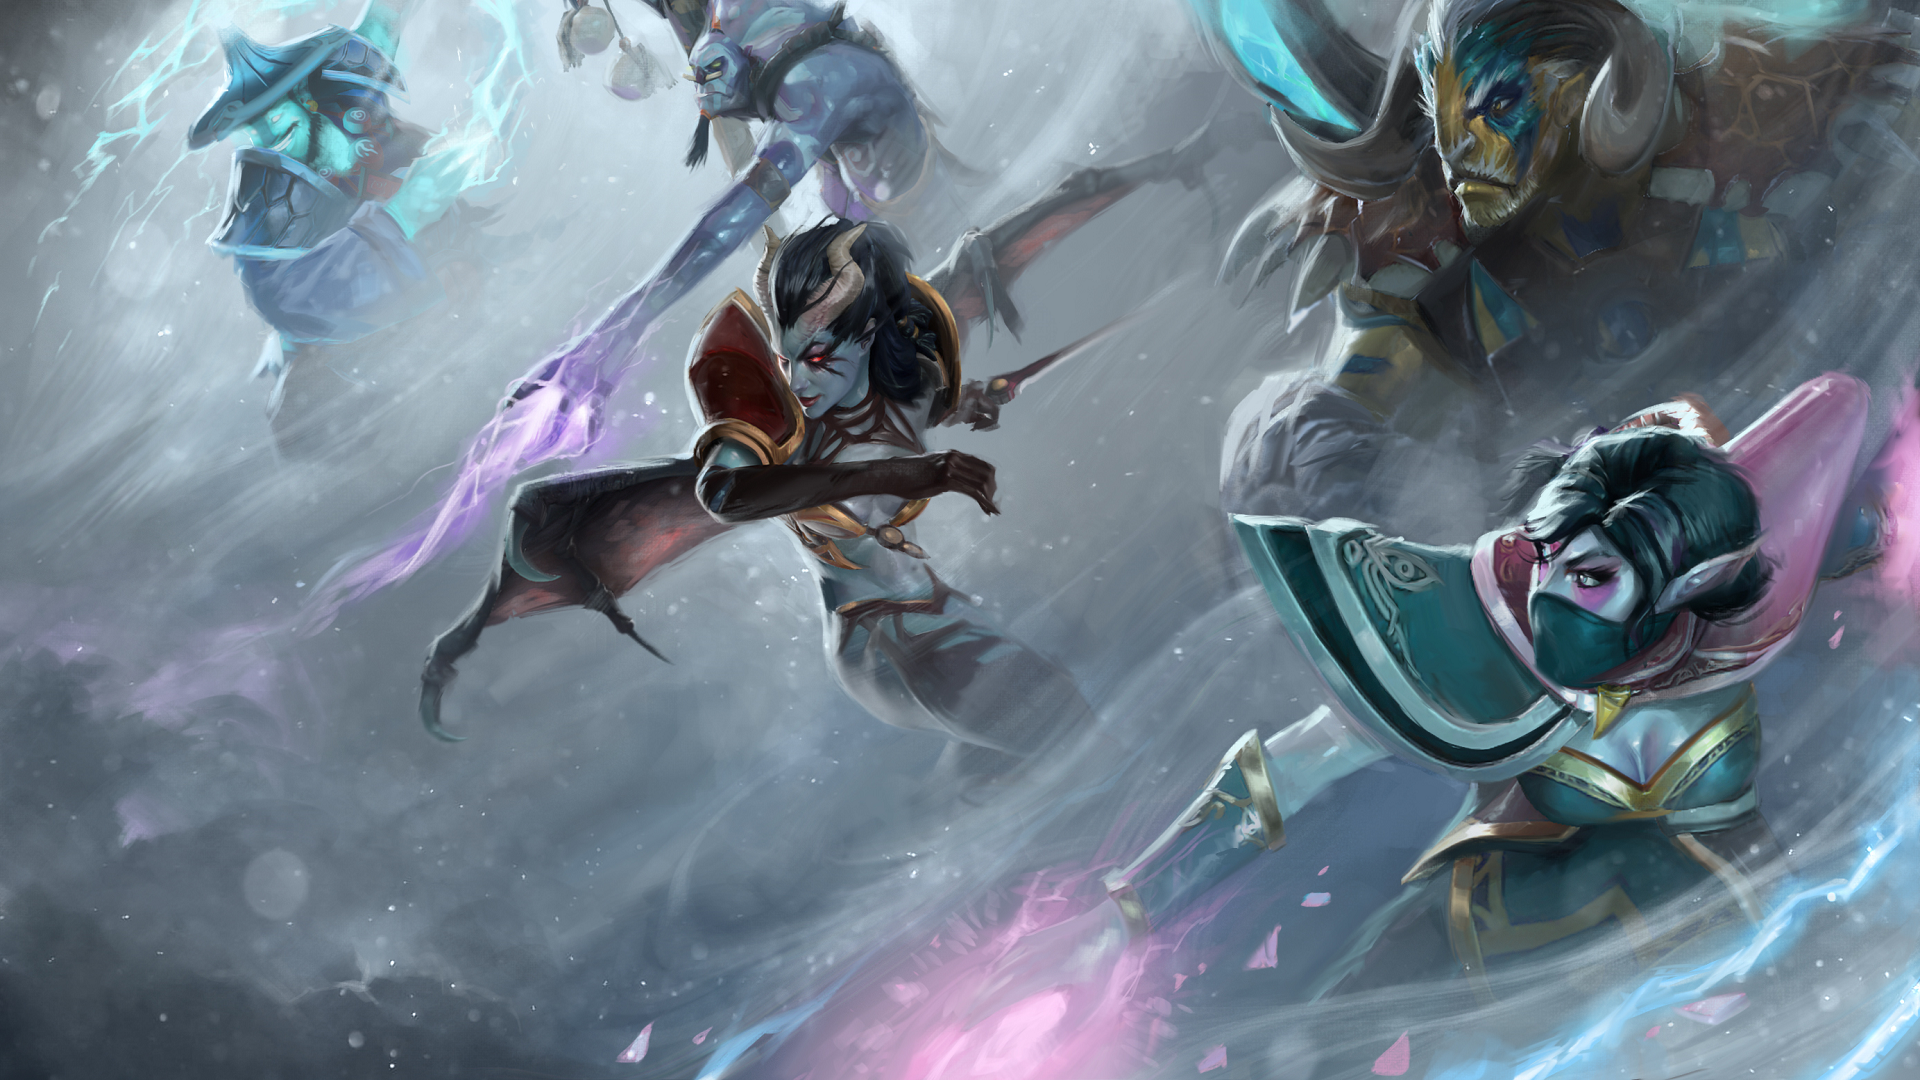 dota 2 wallpapers hd,action adventure game,games,cg artwork,fictional character,illustration